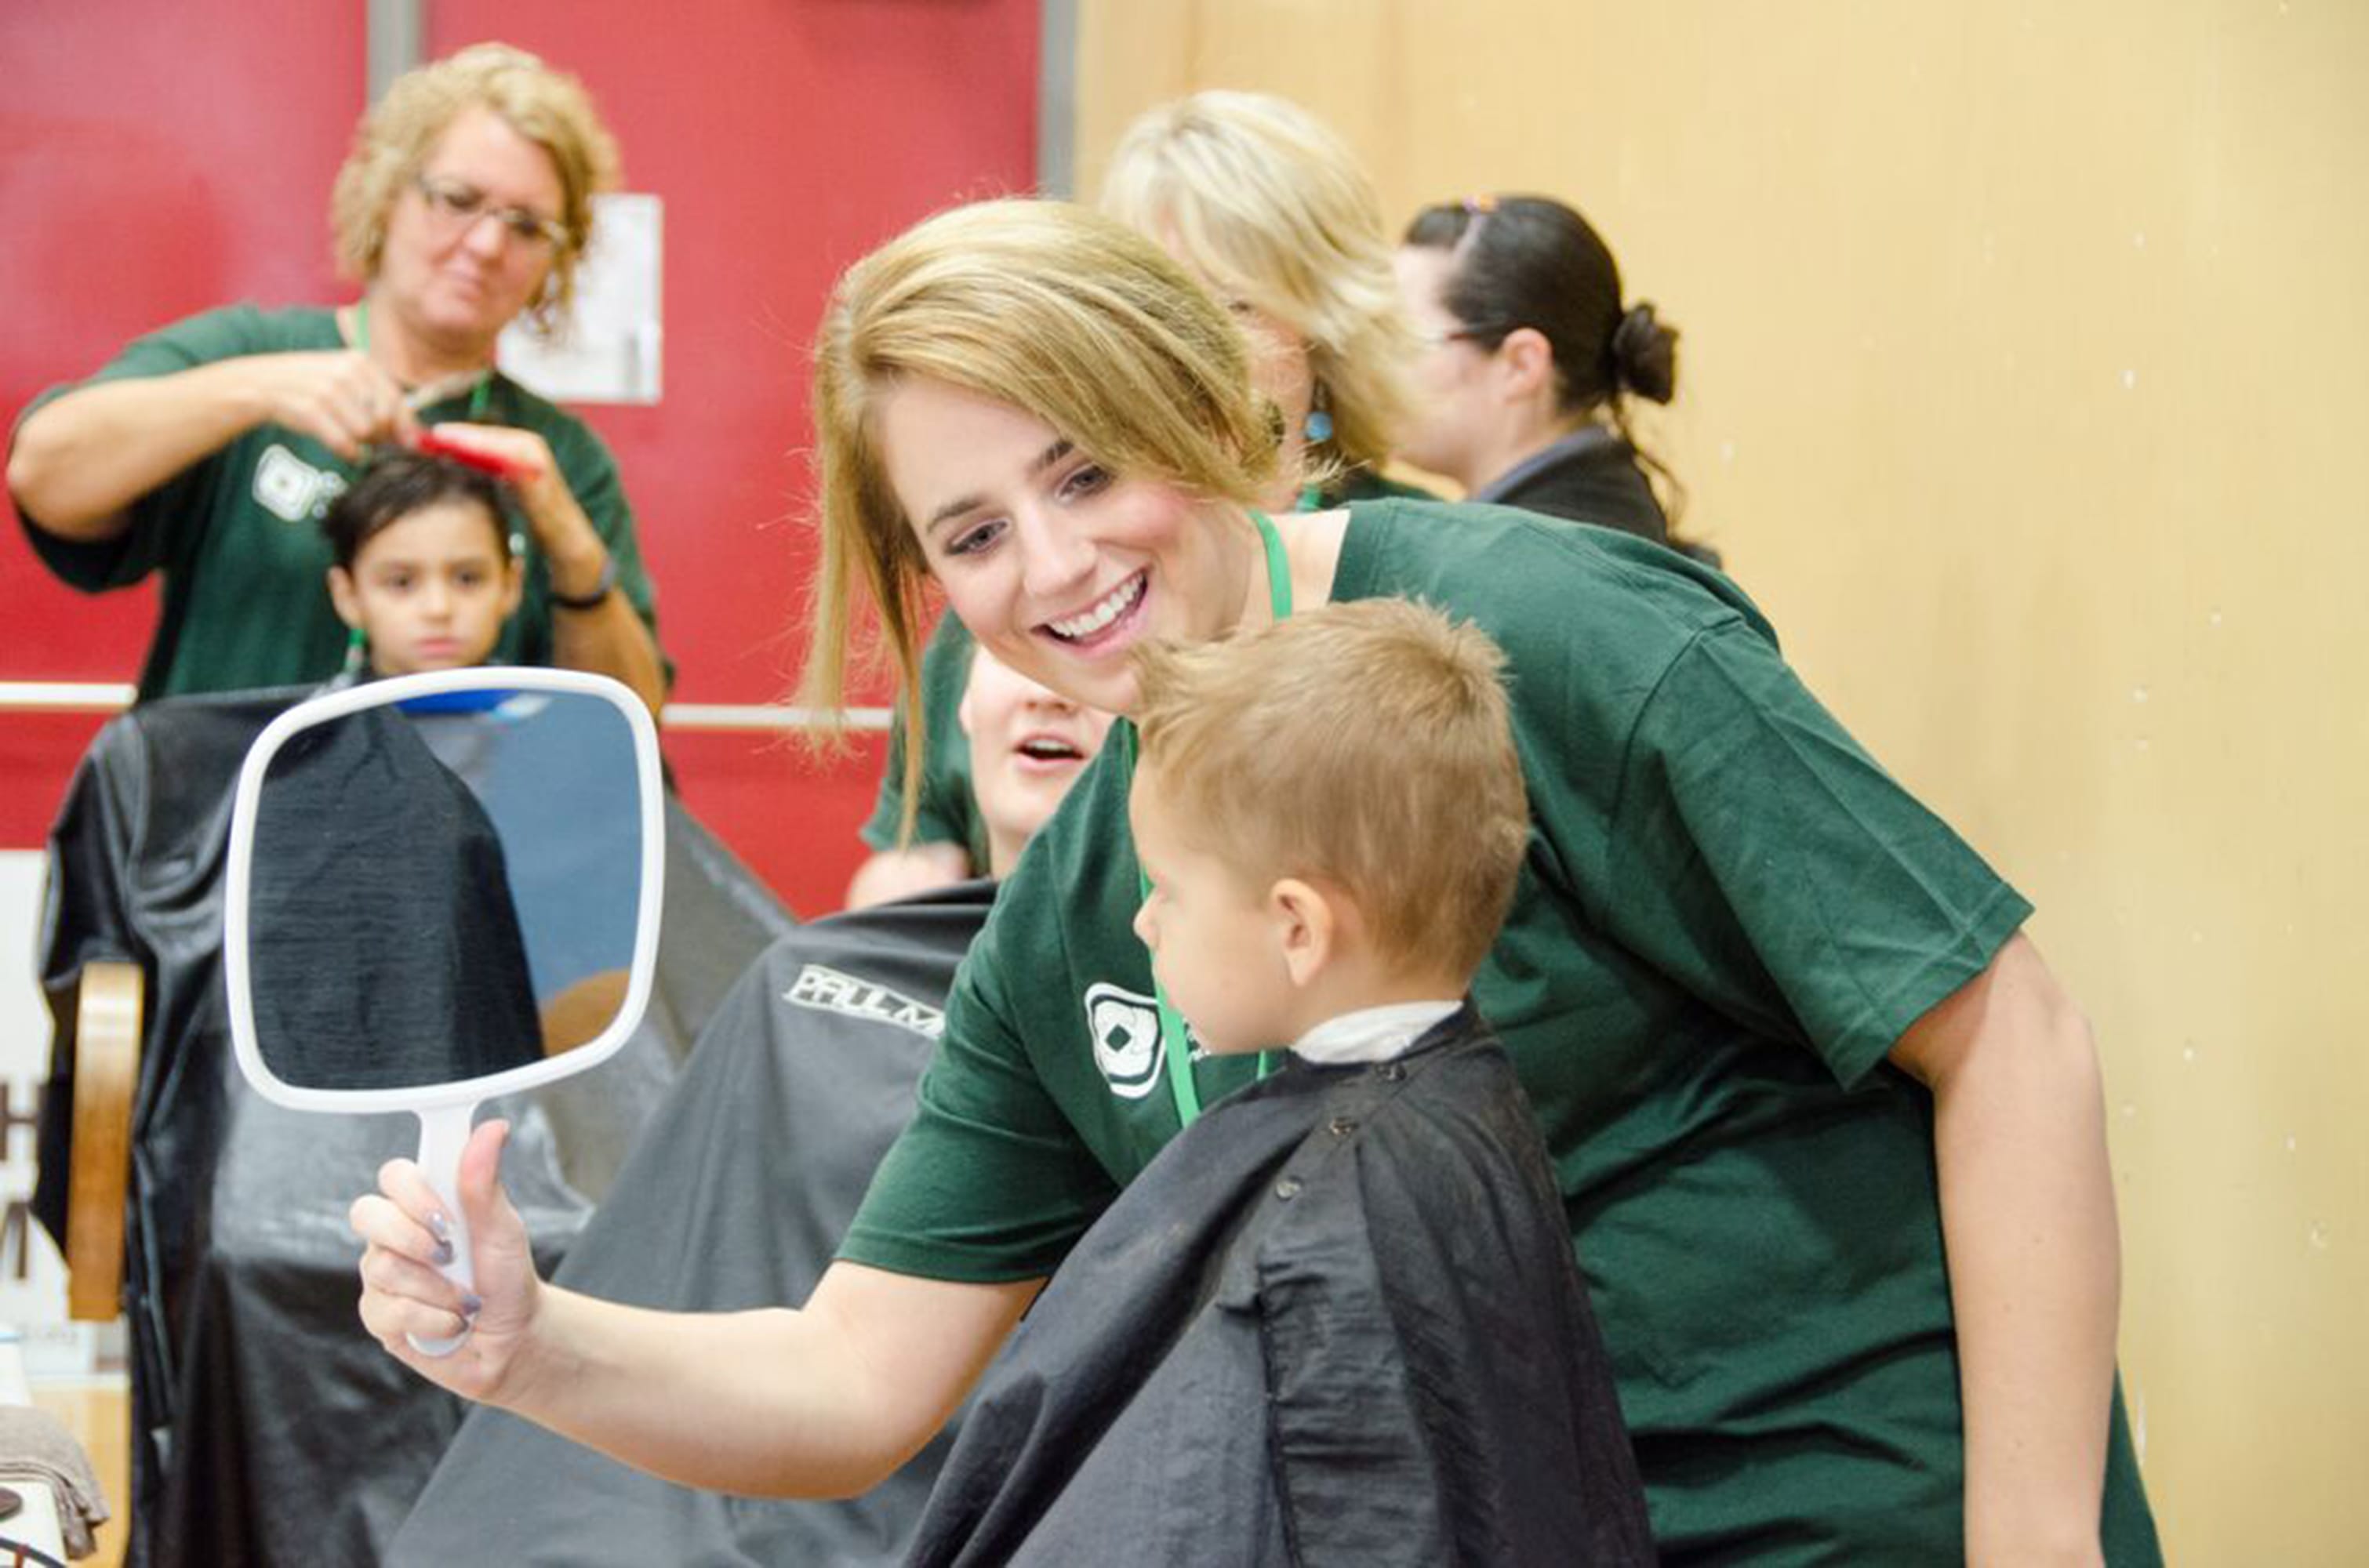 Hairstylists donated their time to provide free haircuts during the Compassion Ridgefield event at View Ridge Middle School last year. Stylists provided 92 free hair cuts during the 2014 event.